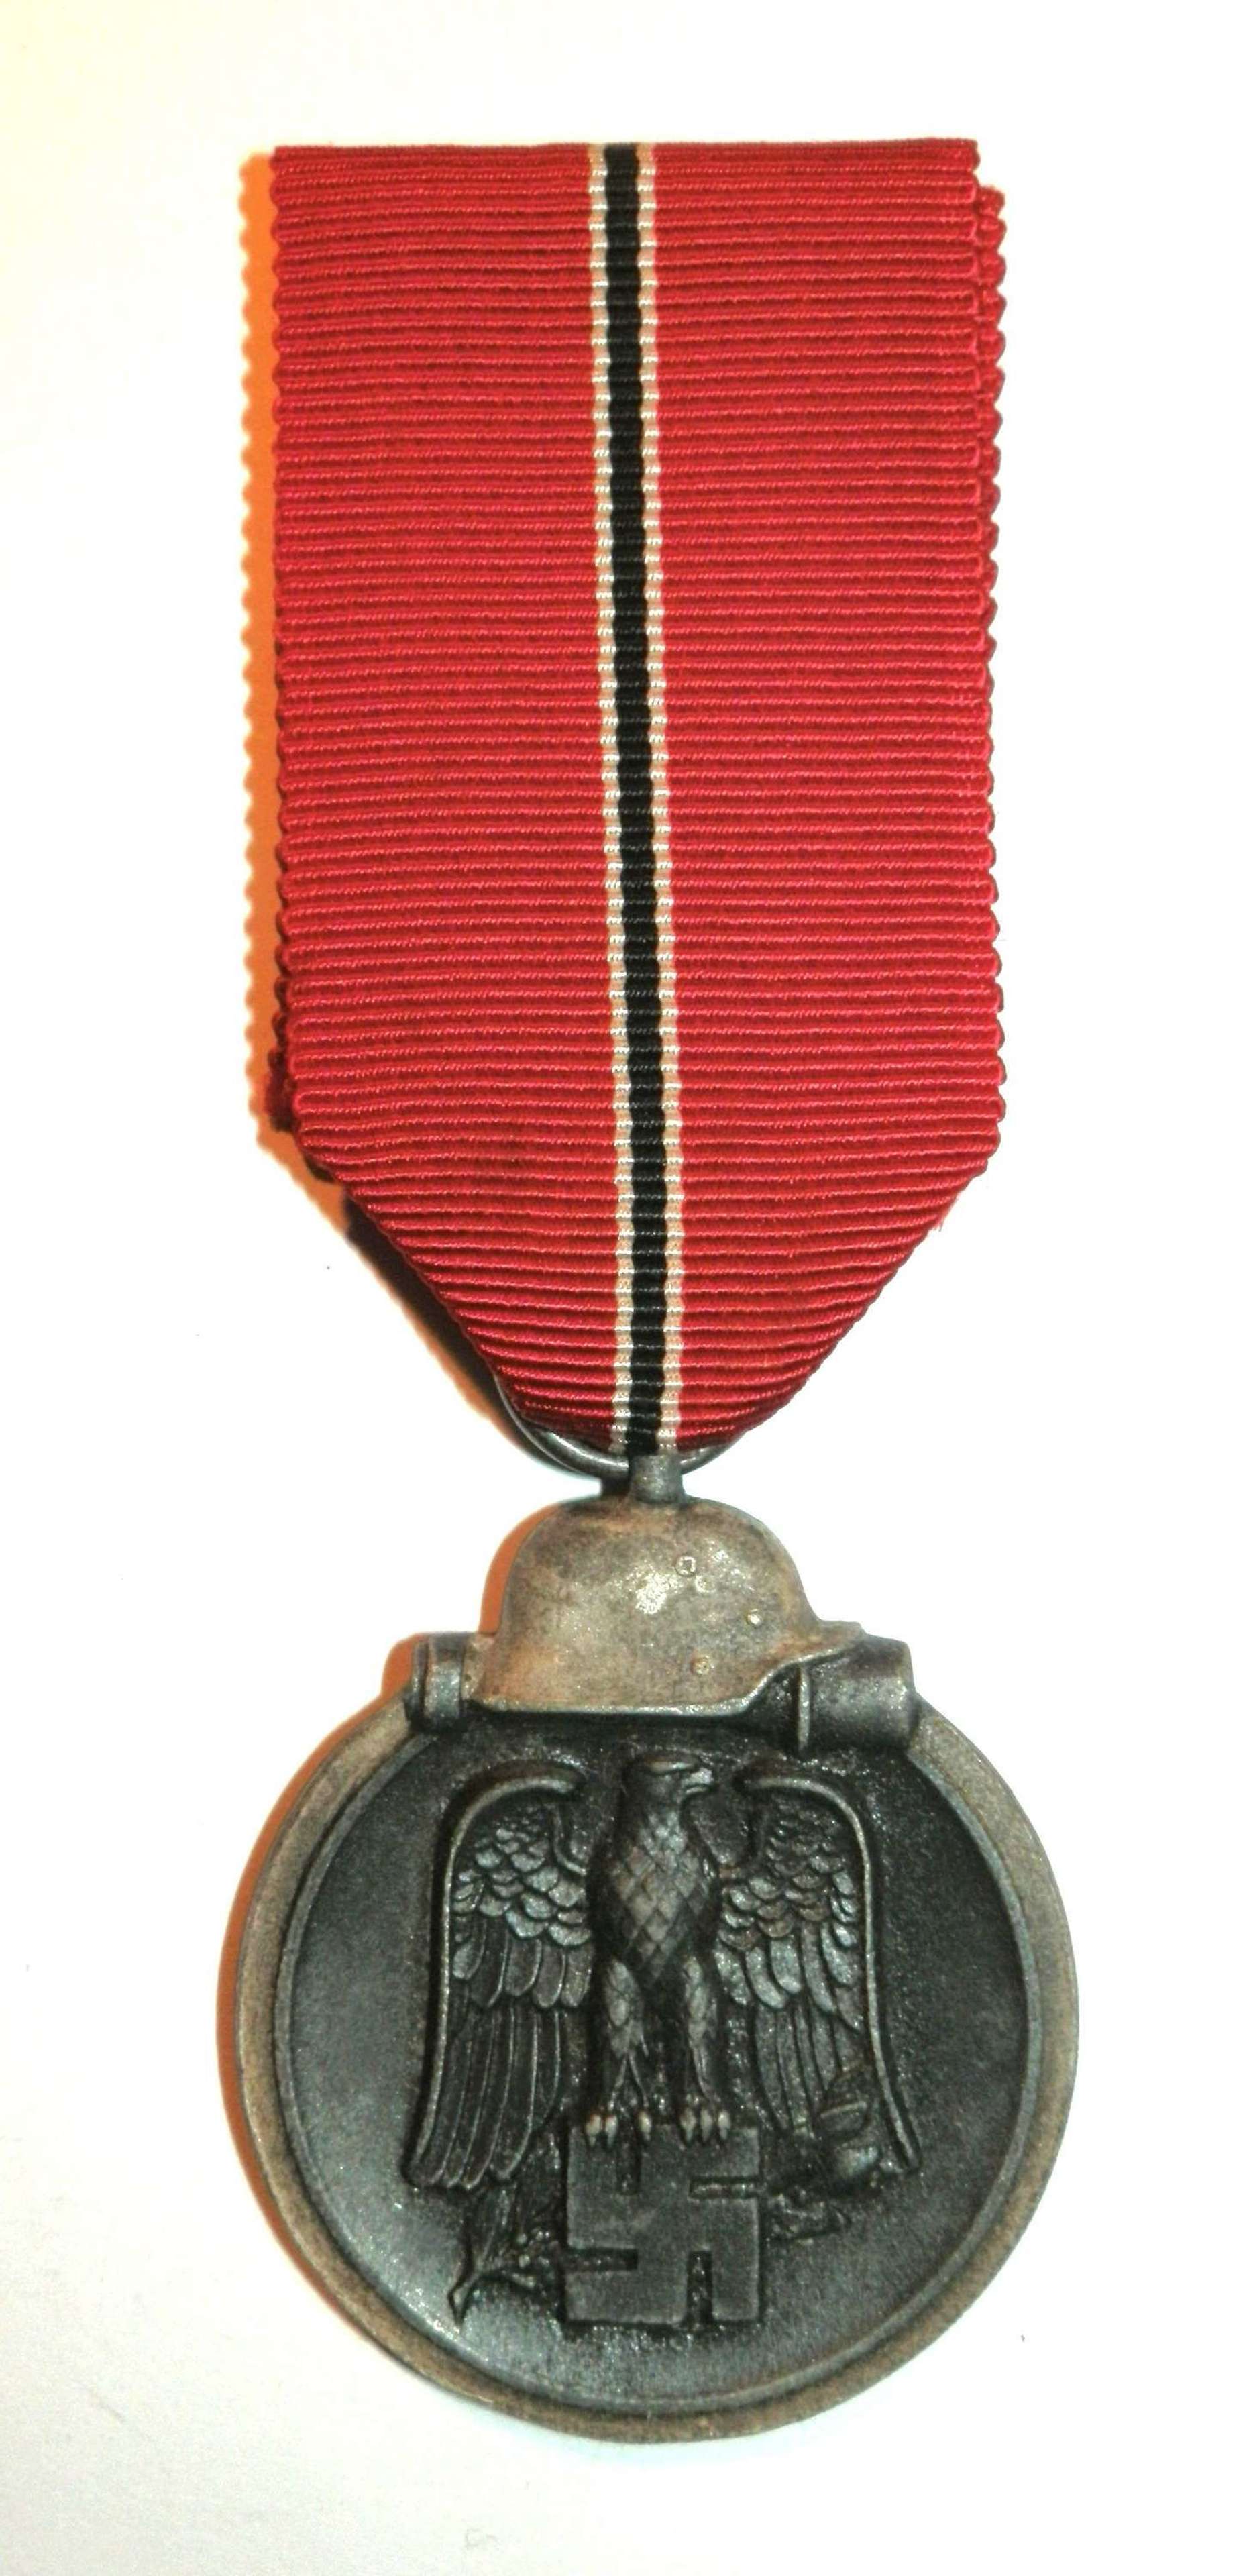 Winter Campaign Medal Russia 1941-42. (Eastern Front Medal) Marked 7